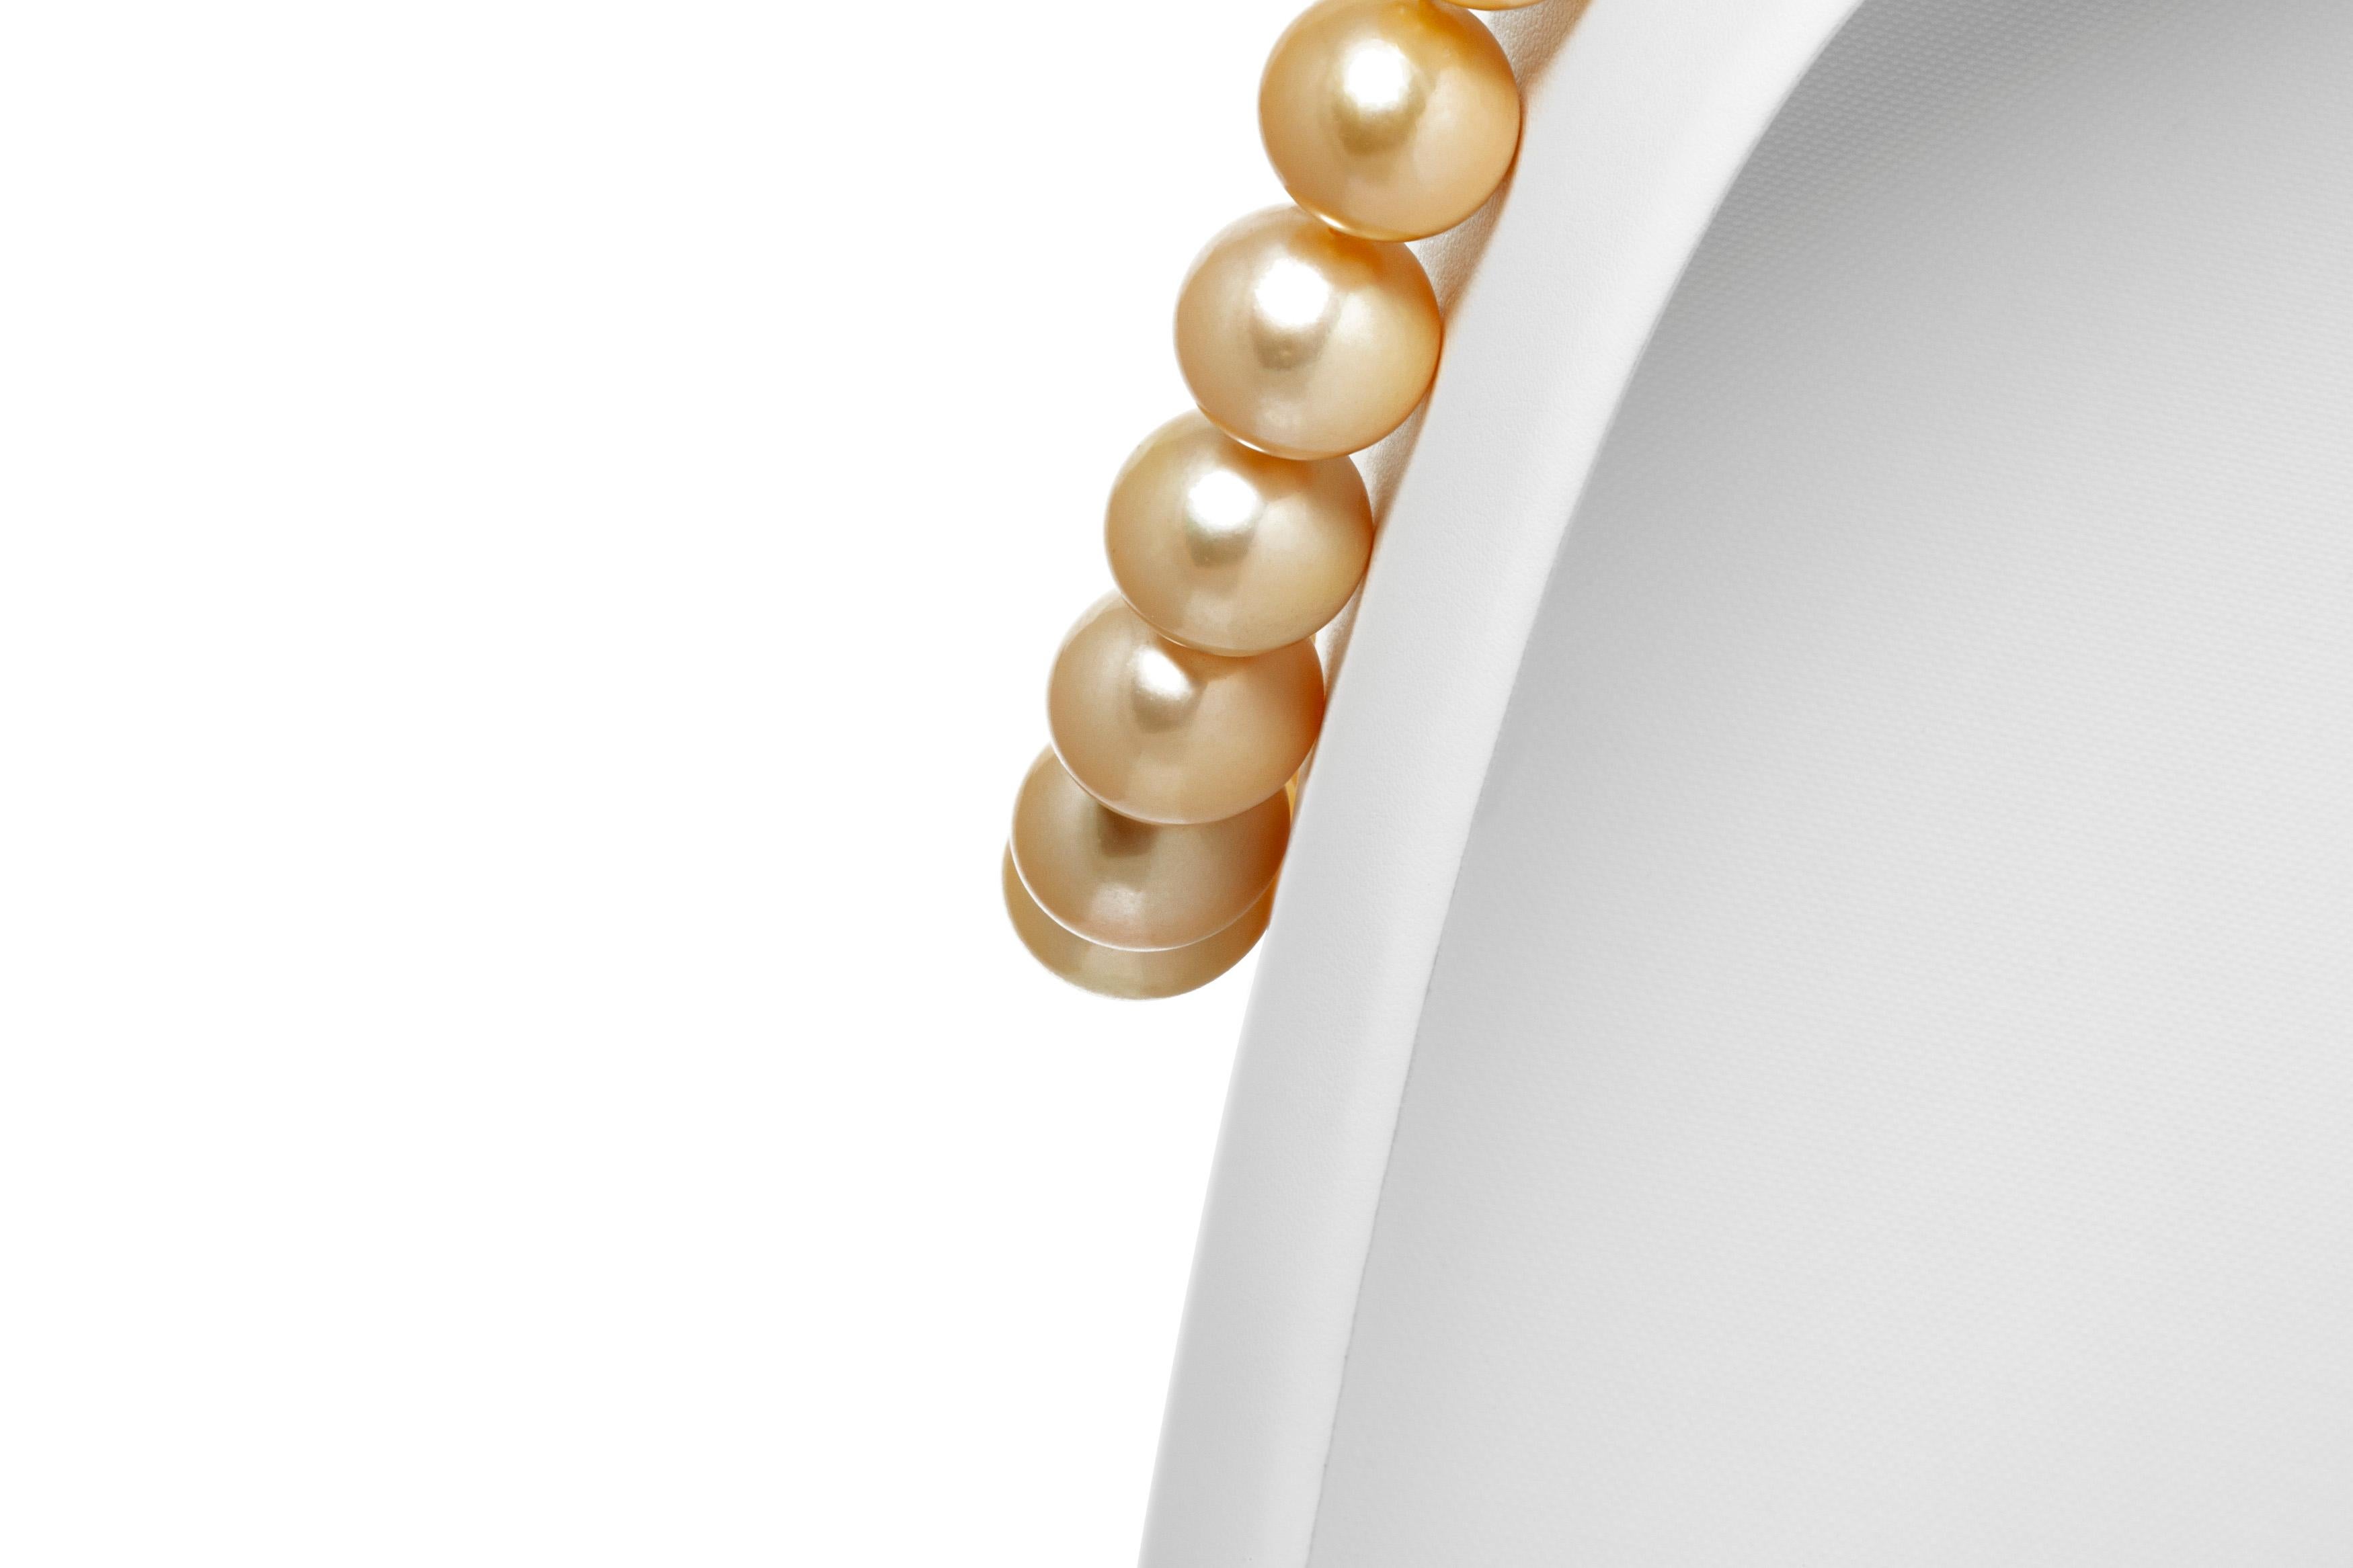 Pearl necklace, finely crafted in 18k yellow gold with diamonds weighing approximately a total of 1.50 carat. Size of the pearls is between 12mm - 12.5mm and 15.5mm - 16.00mm. Circa 2000.